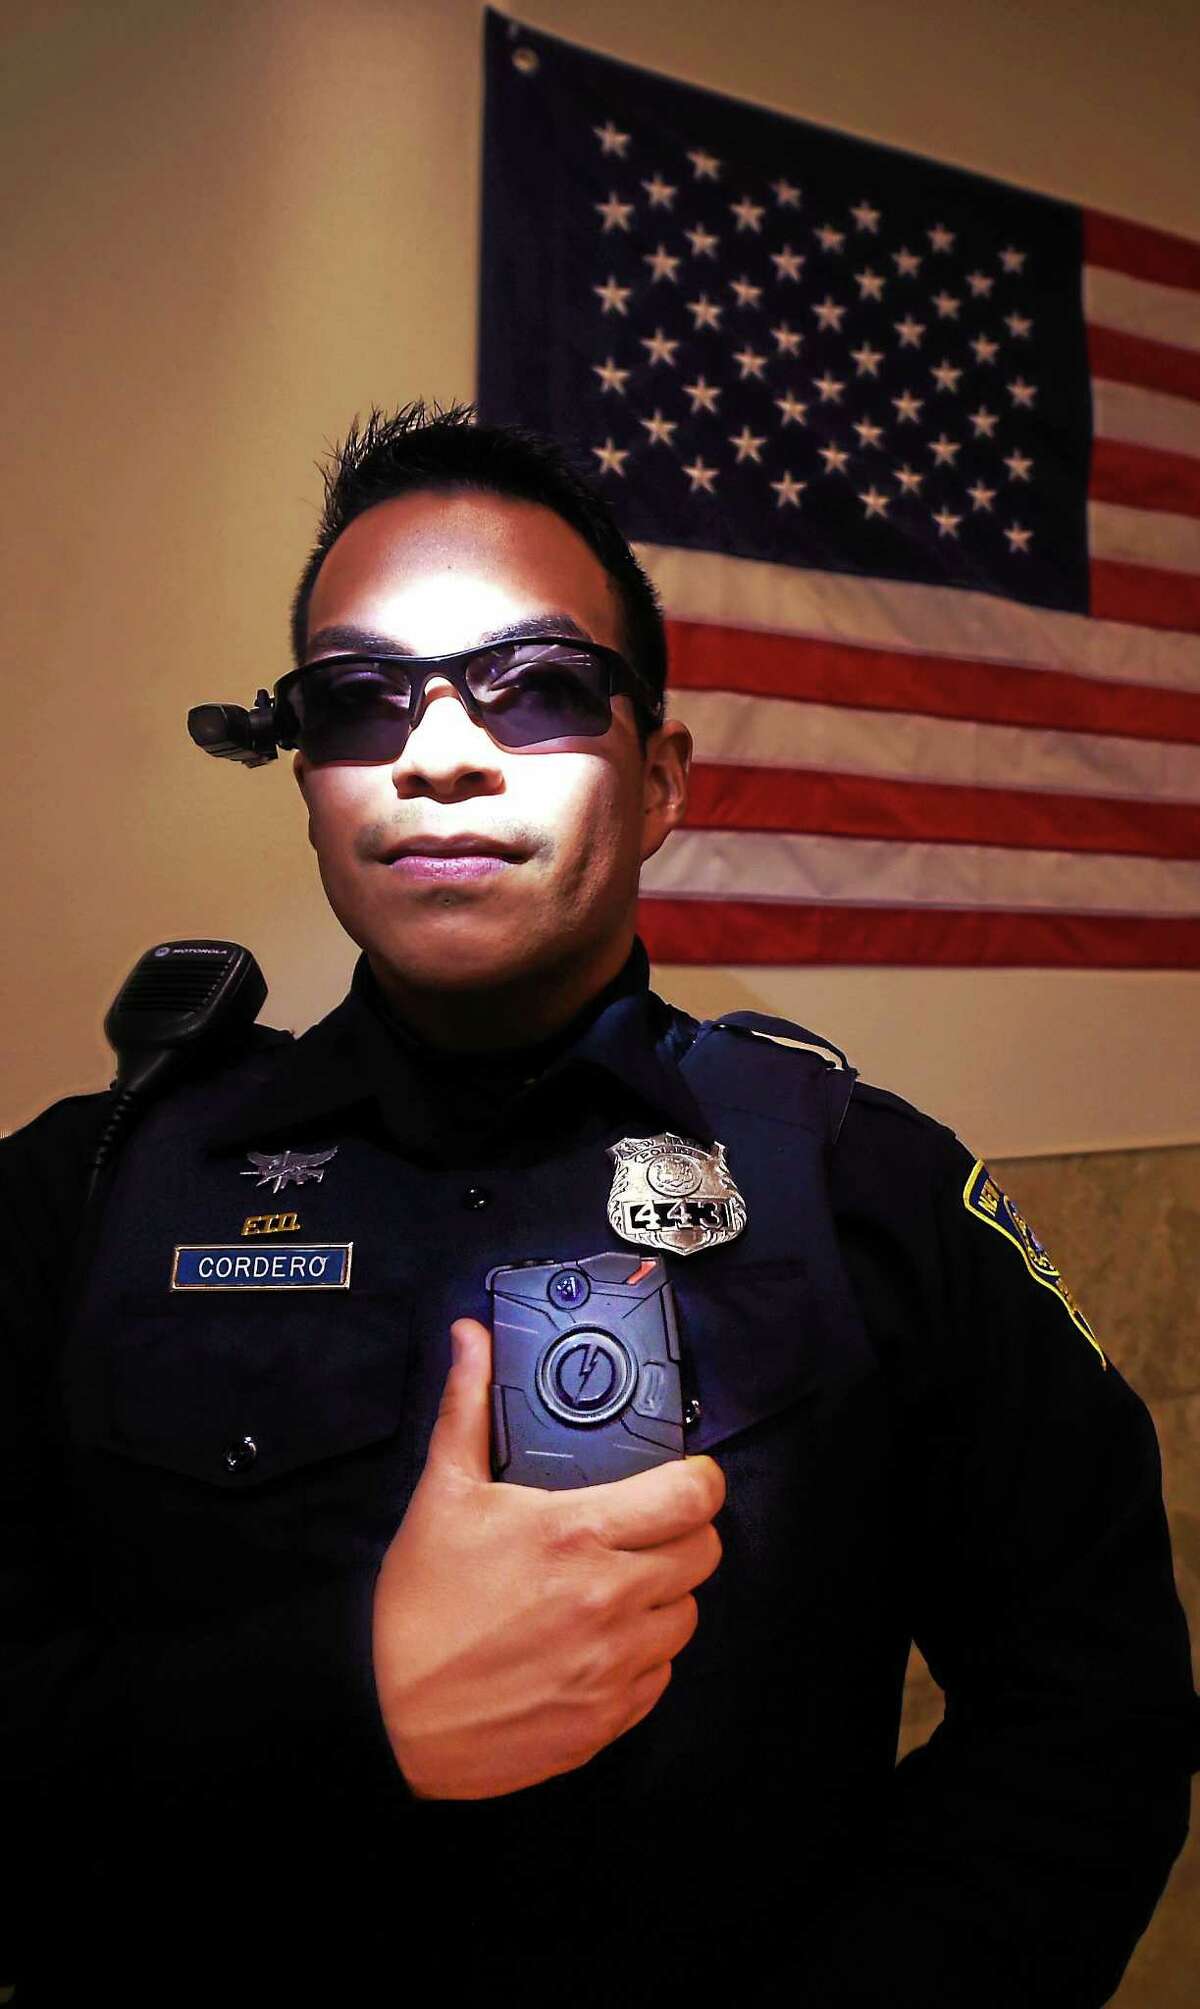 New Haven Police Officer Jeremy Cordero wears sunglasses equipped with a police body camera and also holds a body camera attached to his uniform. The body cameras are part of an NHPD pilot program testing three different body cameras. Friday November 13, 2015.